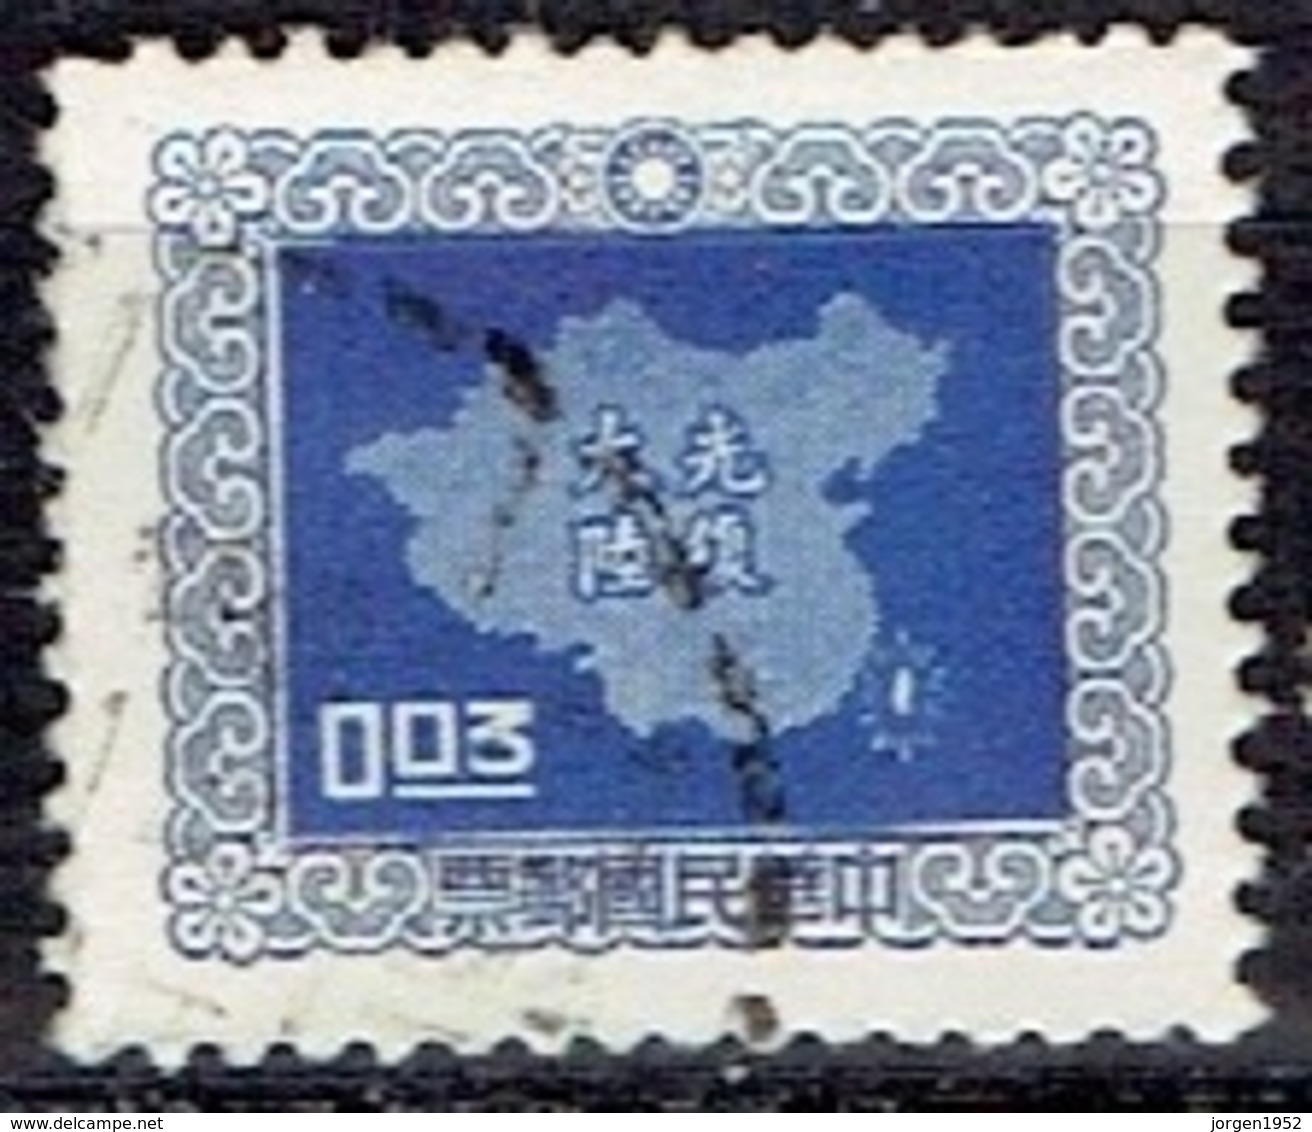 TAIWAN #   FROM 1957 STAMPWORLD 257 - Used Stamps